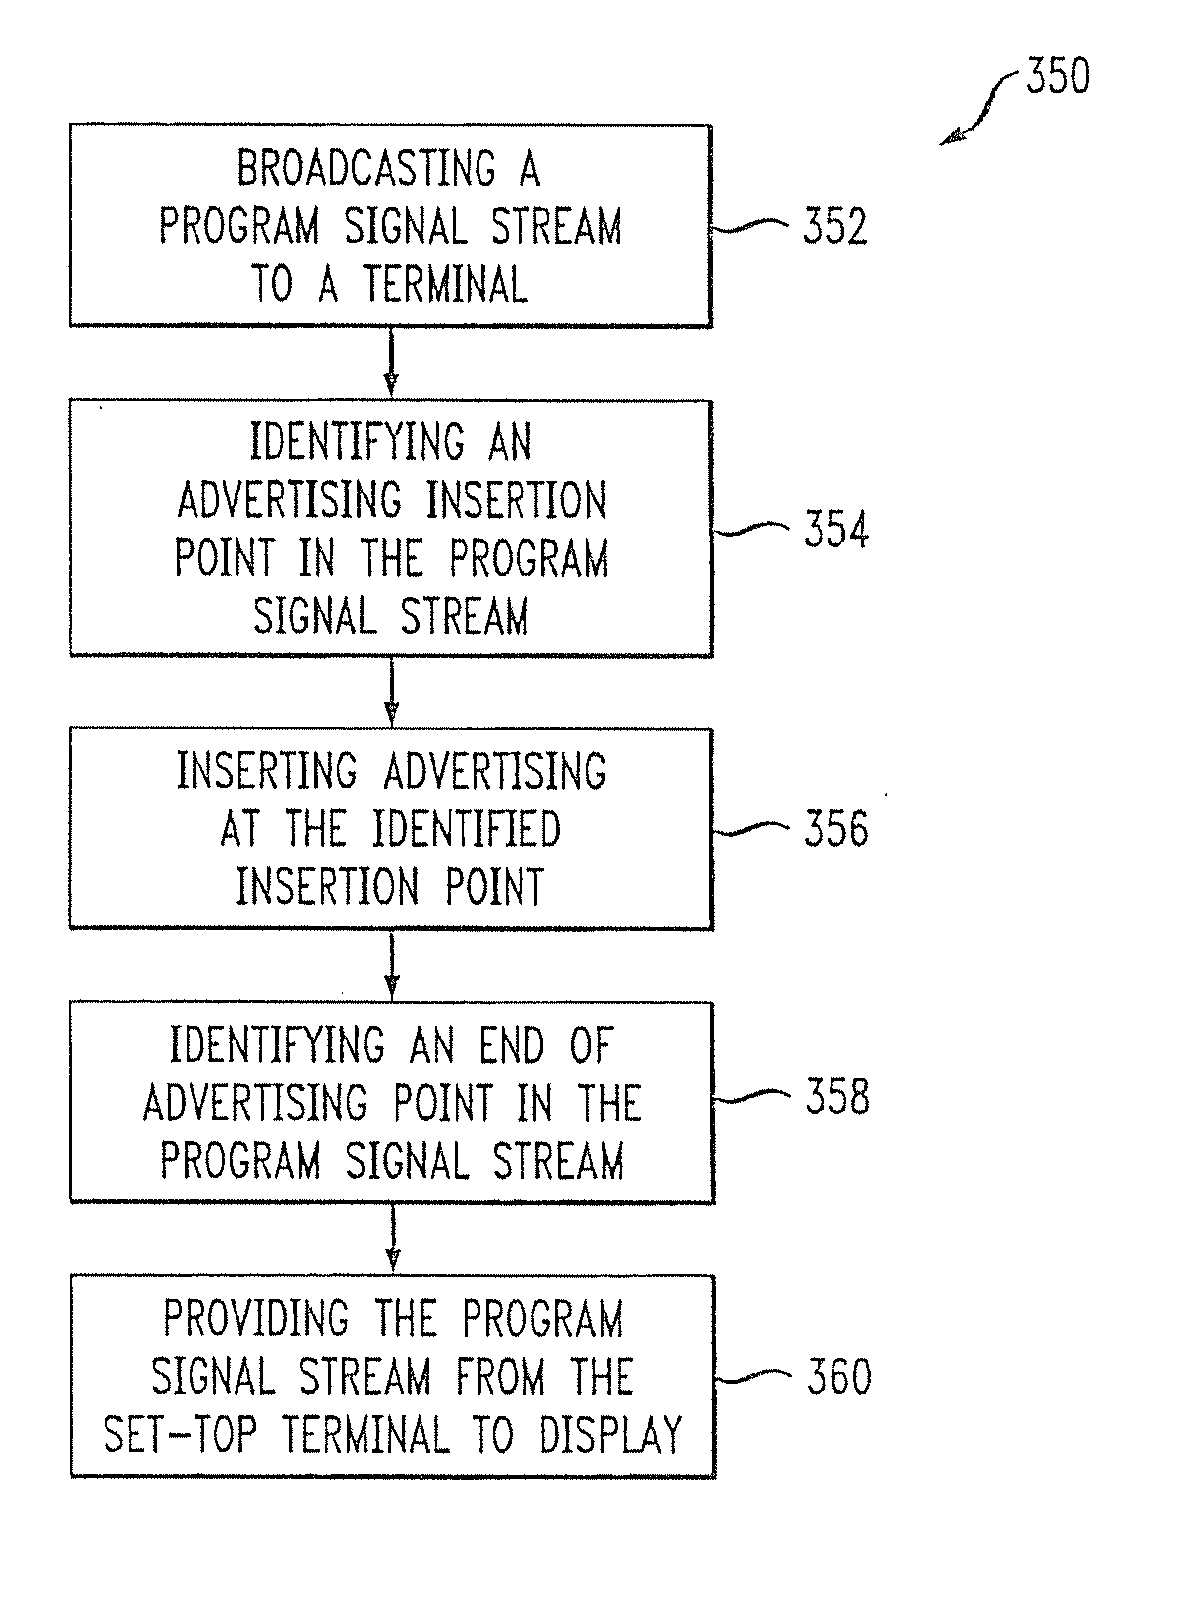 Use of multiple embedded messages in program signal streams